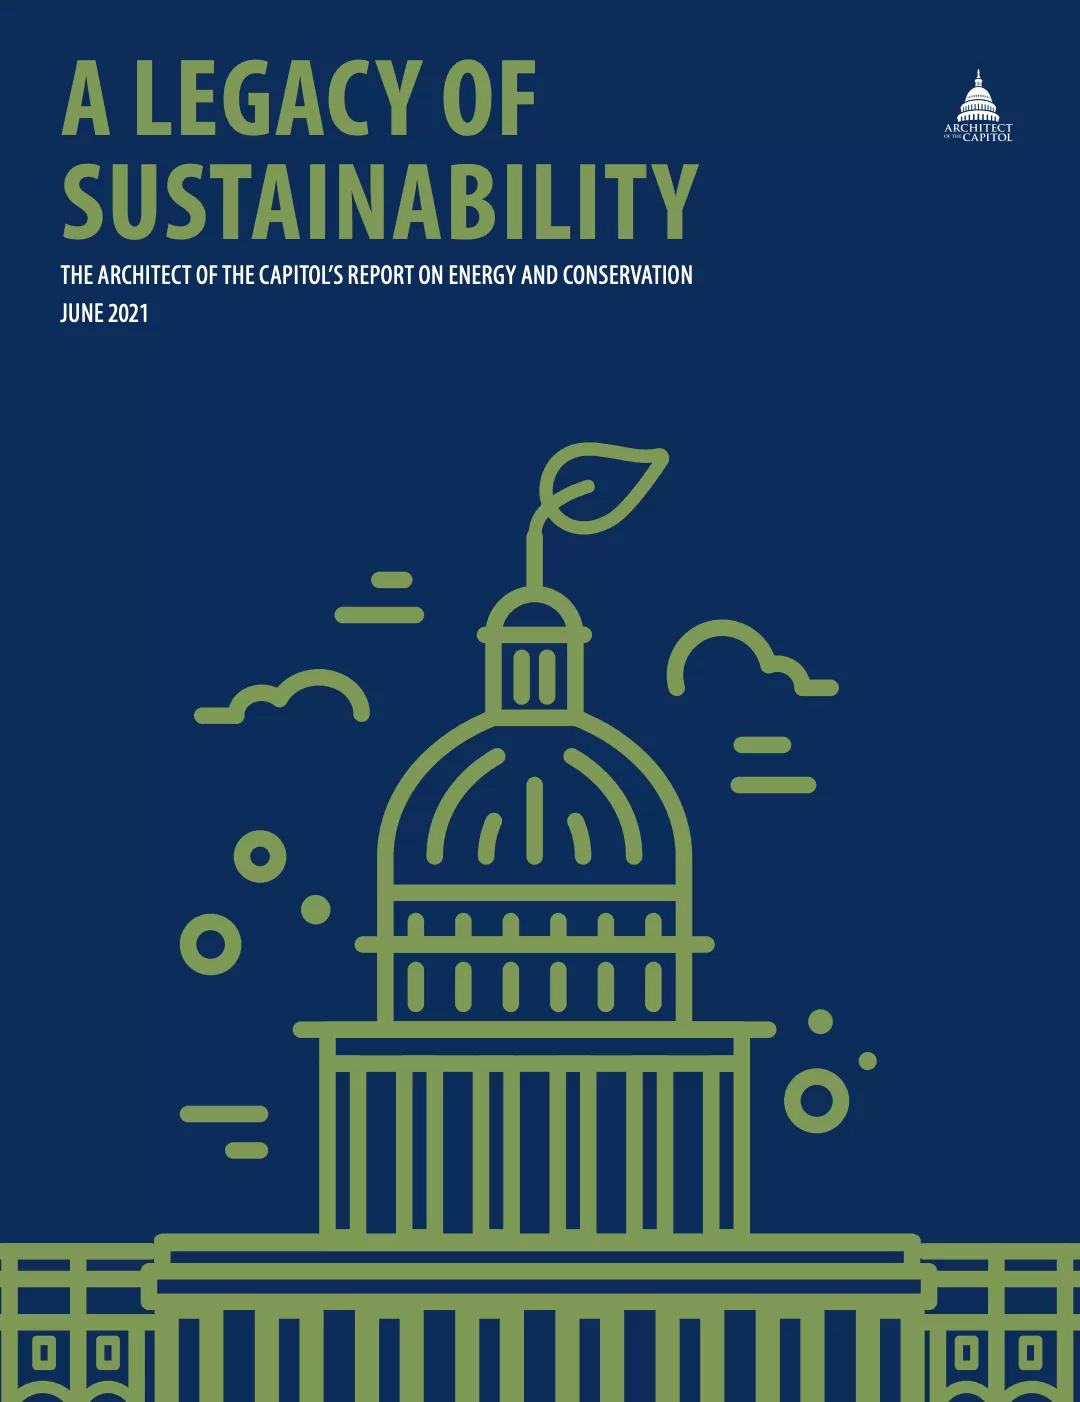 Cover Image: A LEGACY OF SUSTAINABILITY. THE ARCHITECT OF THE CAPITOL'S REPORT ON ENERGY AND CONSERVATION, JUNE 2021.